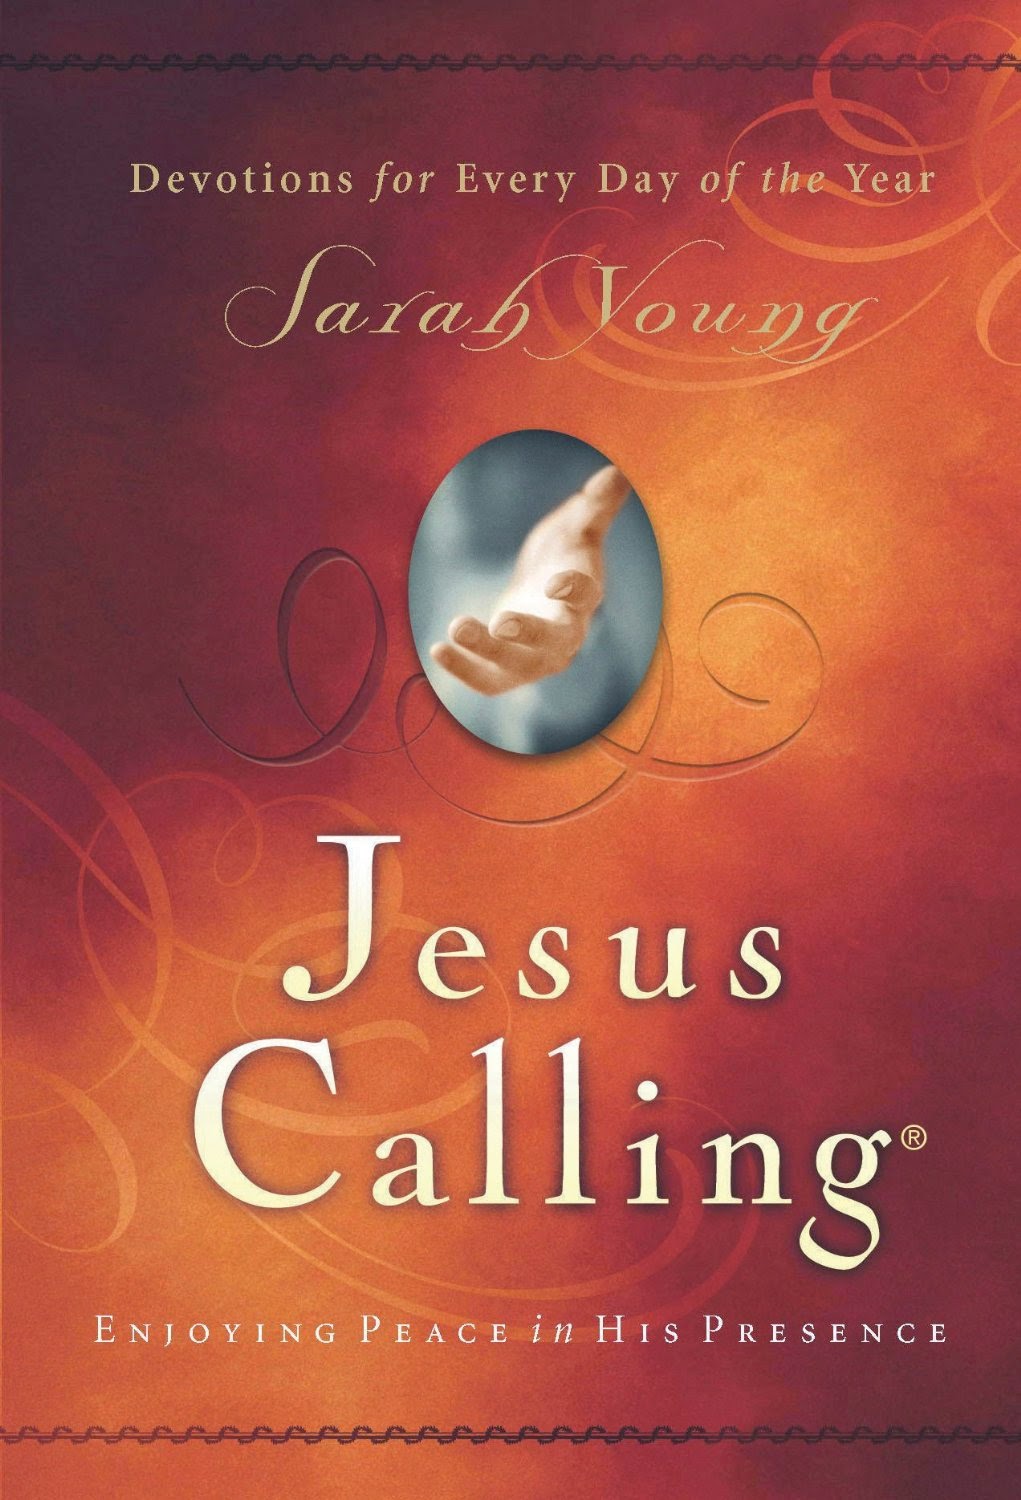 Sola Sisters Sarah Young's Bestseller "Jesus Calling" An